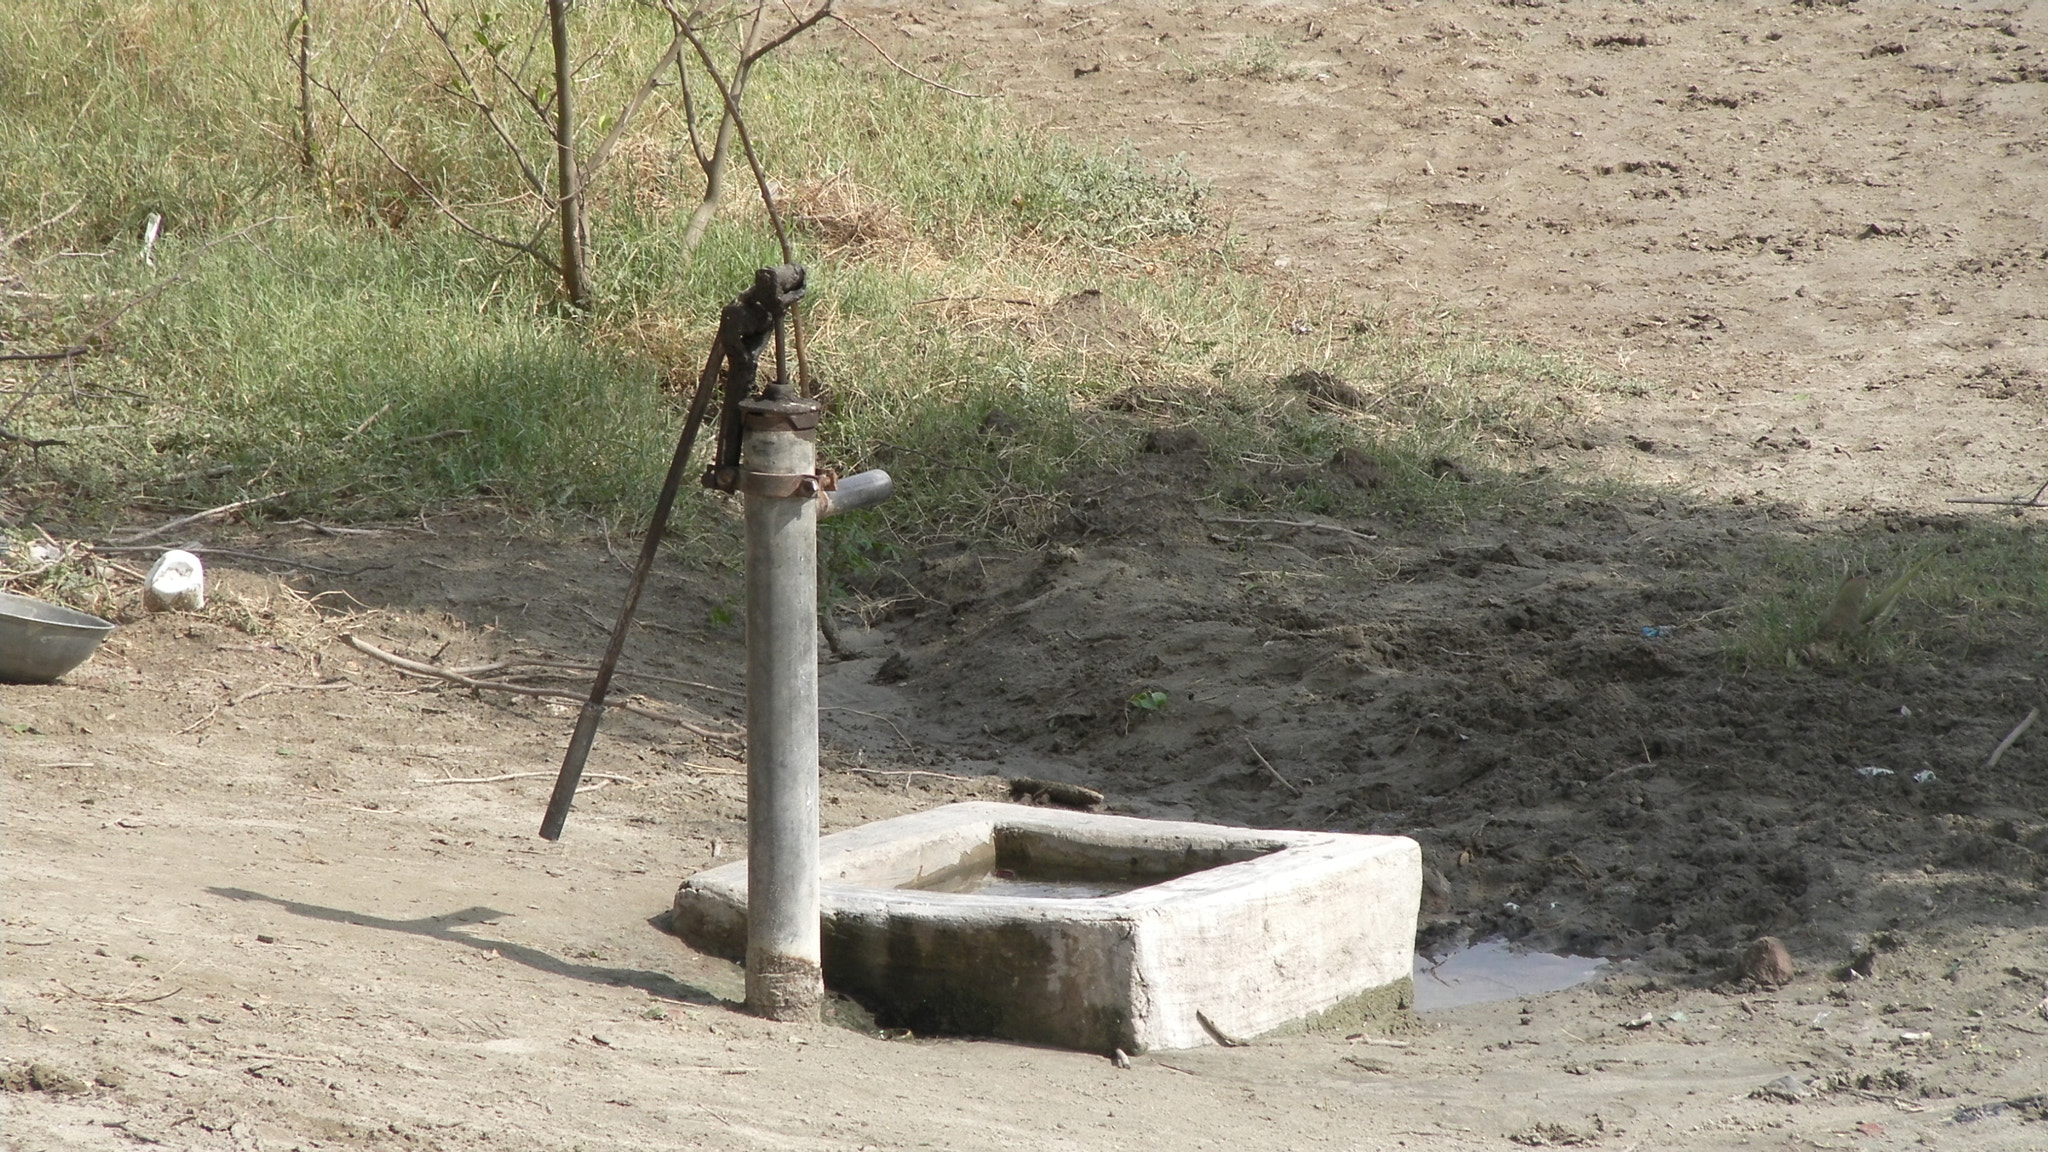 Samsung HMX-R10 sample photo. Old hand water pump photography